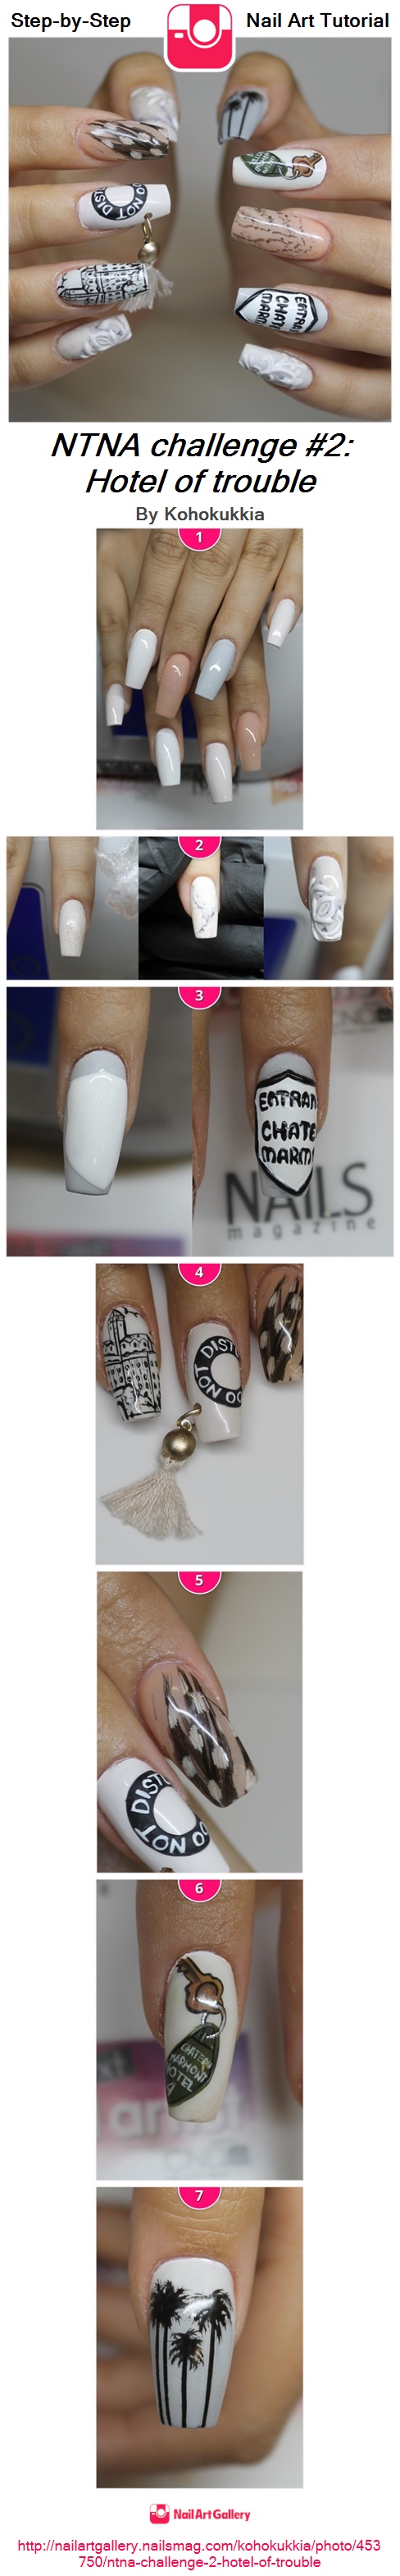 NTNA challenge #2: Hotel of trouble - Nail Art Gallery